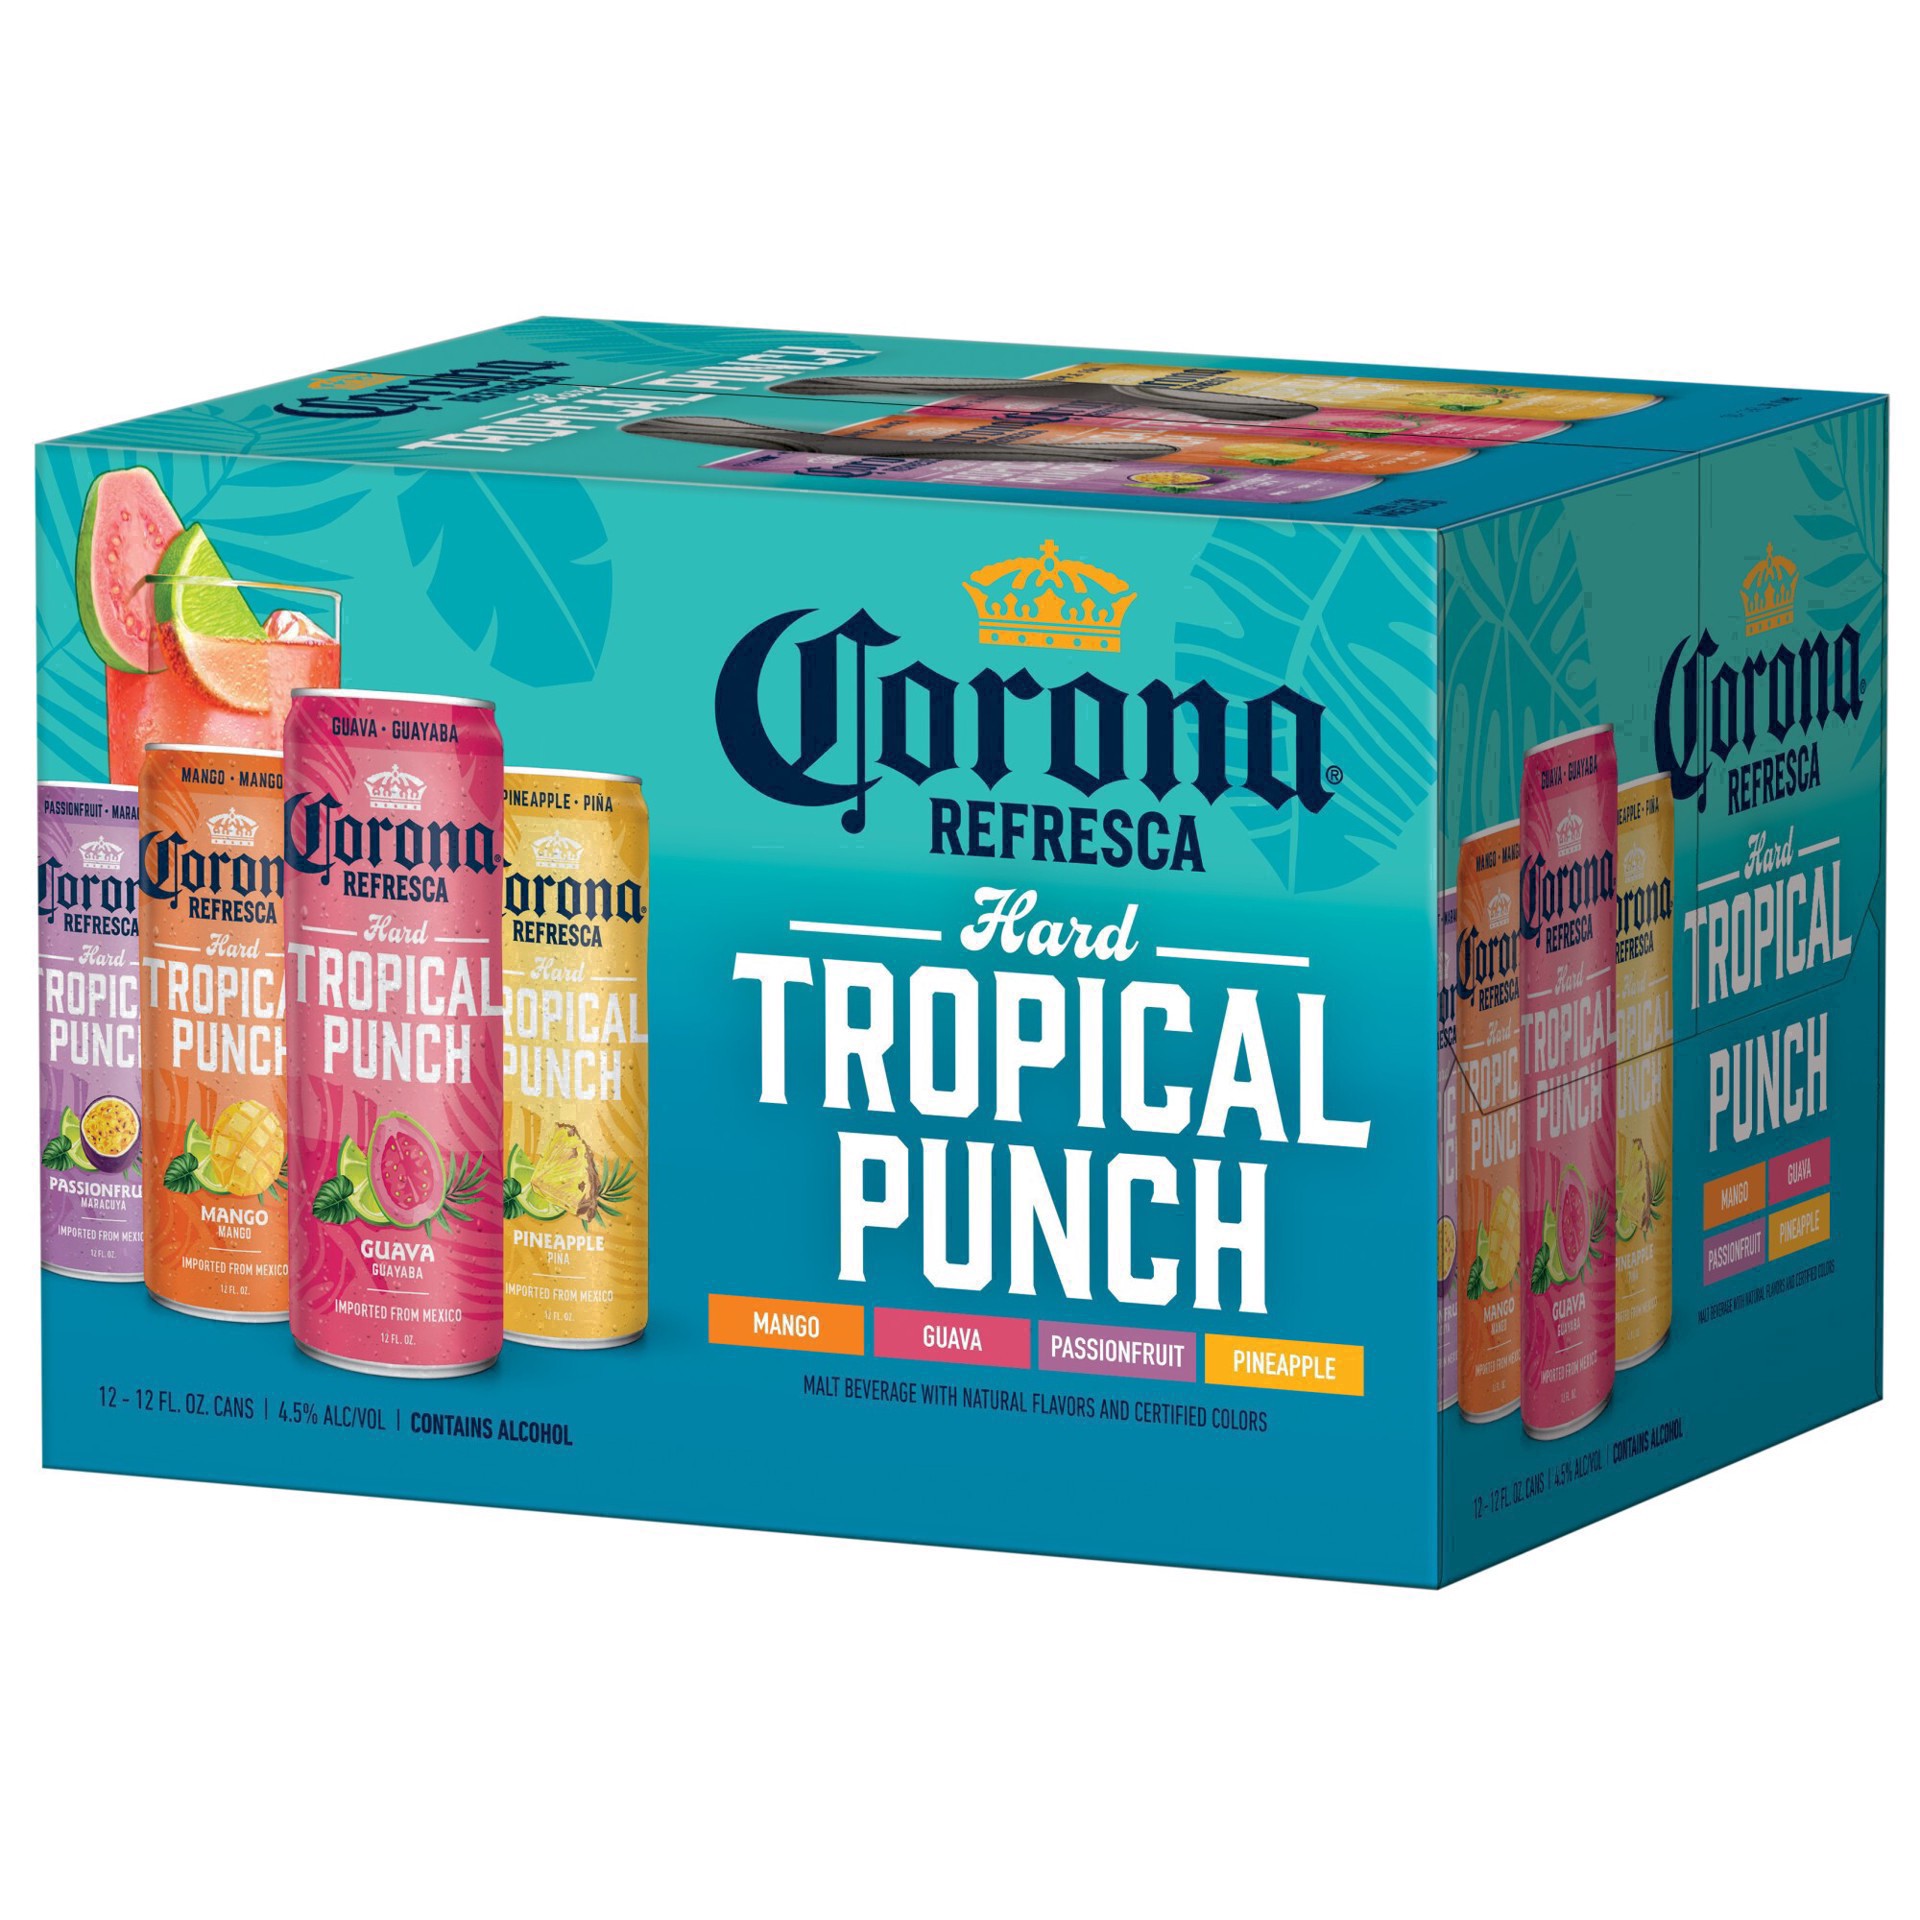 slide 41 of 113, Corona Refresca Hard Tropical Punch Variety Pack Cans, 144 fl oz